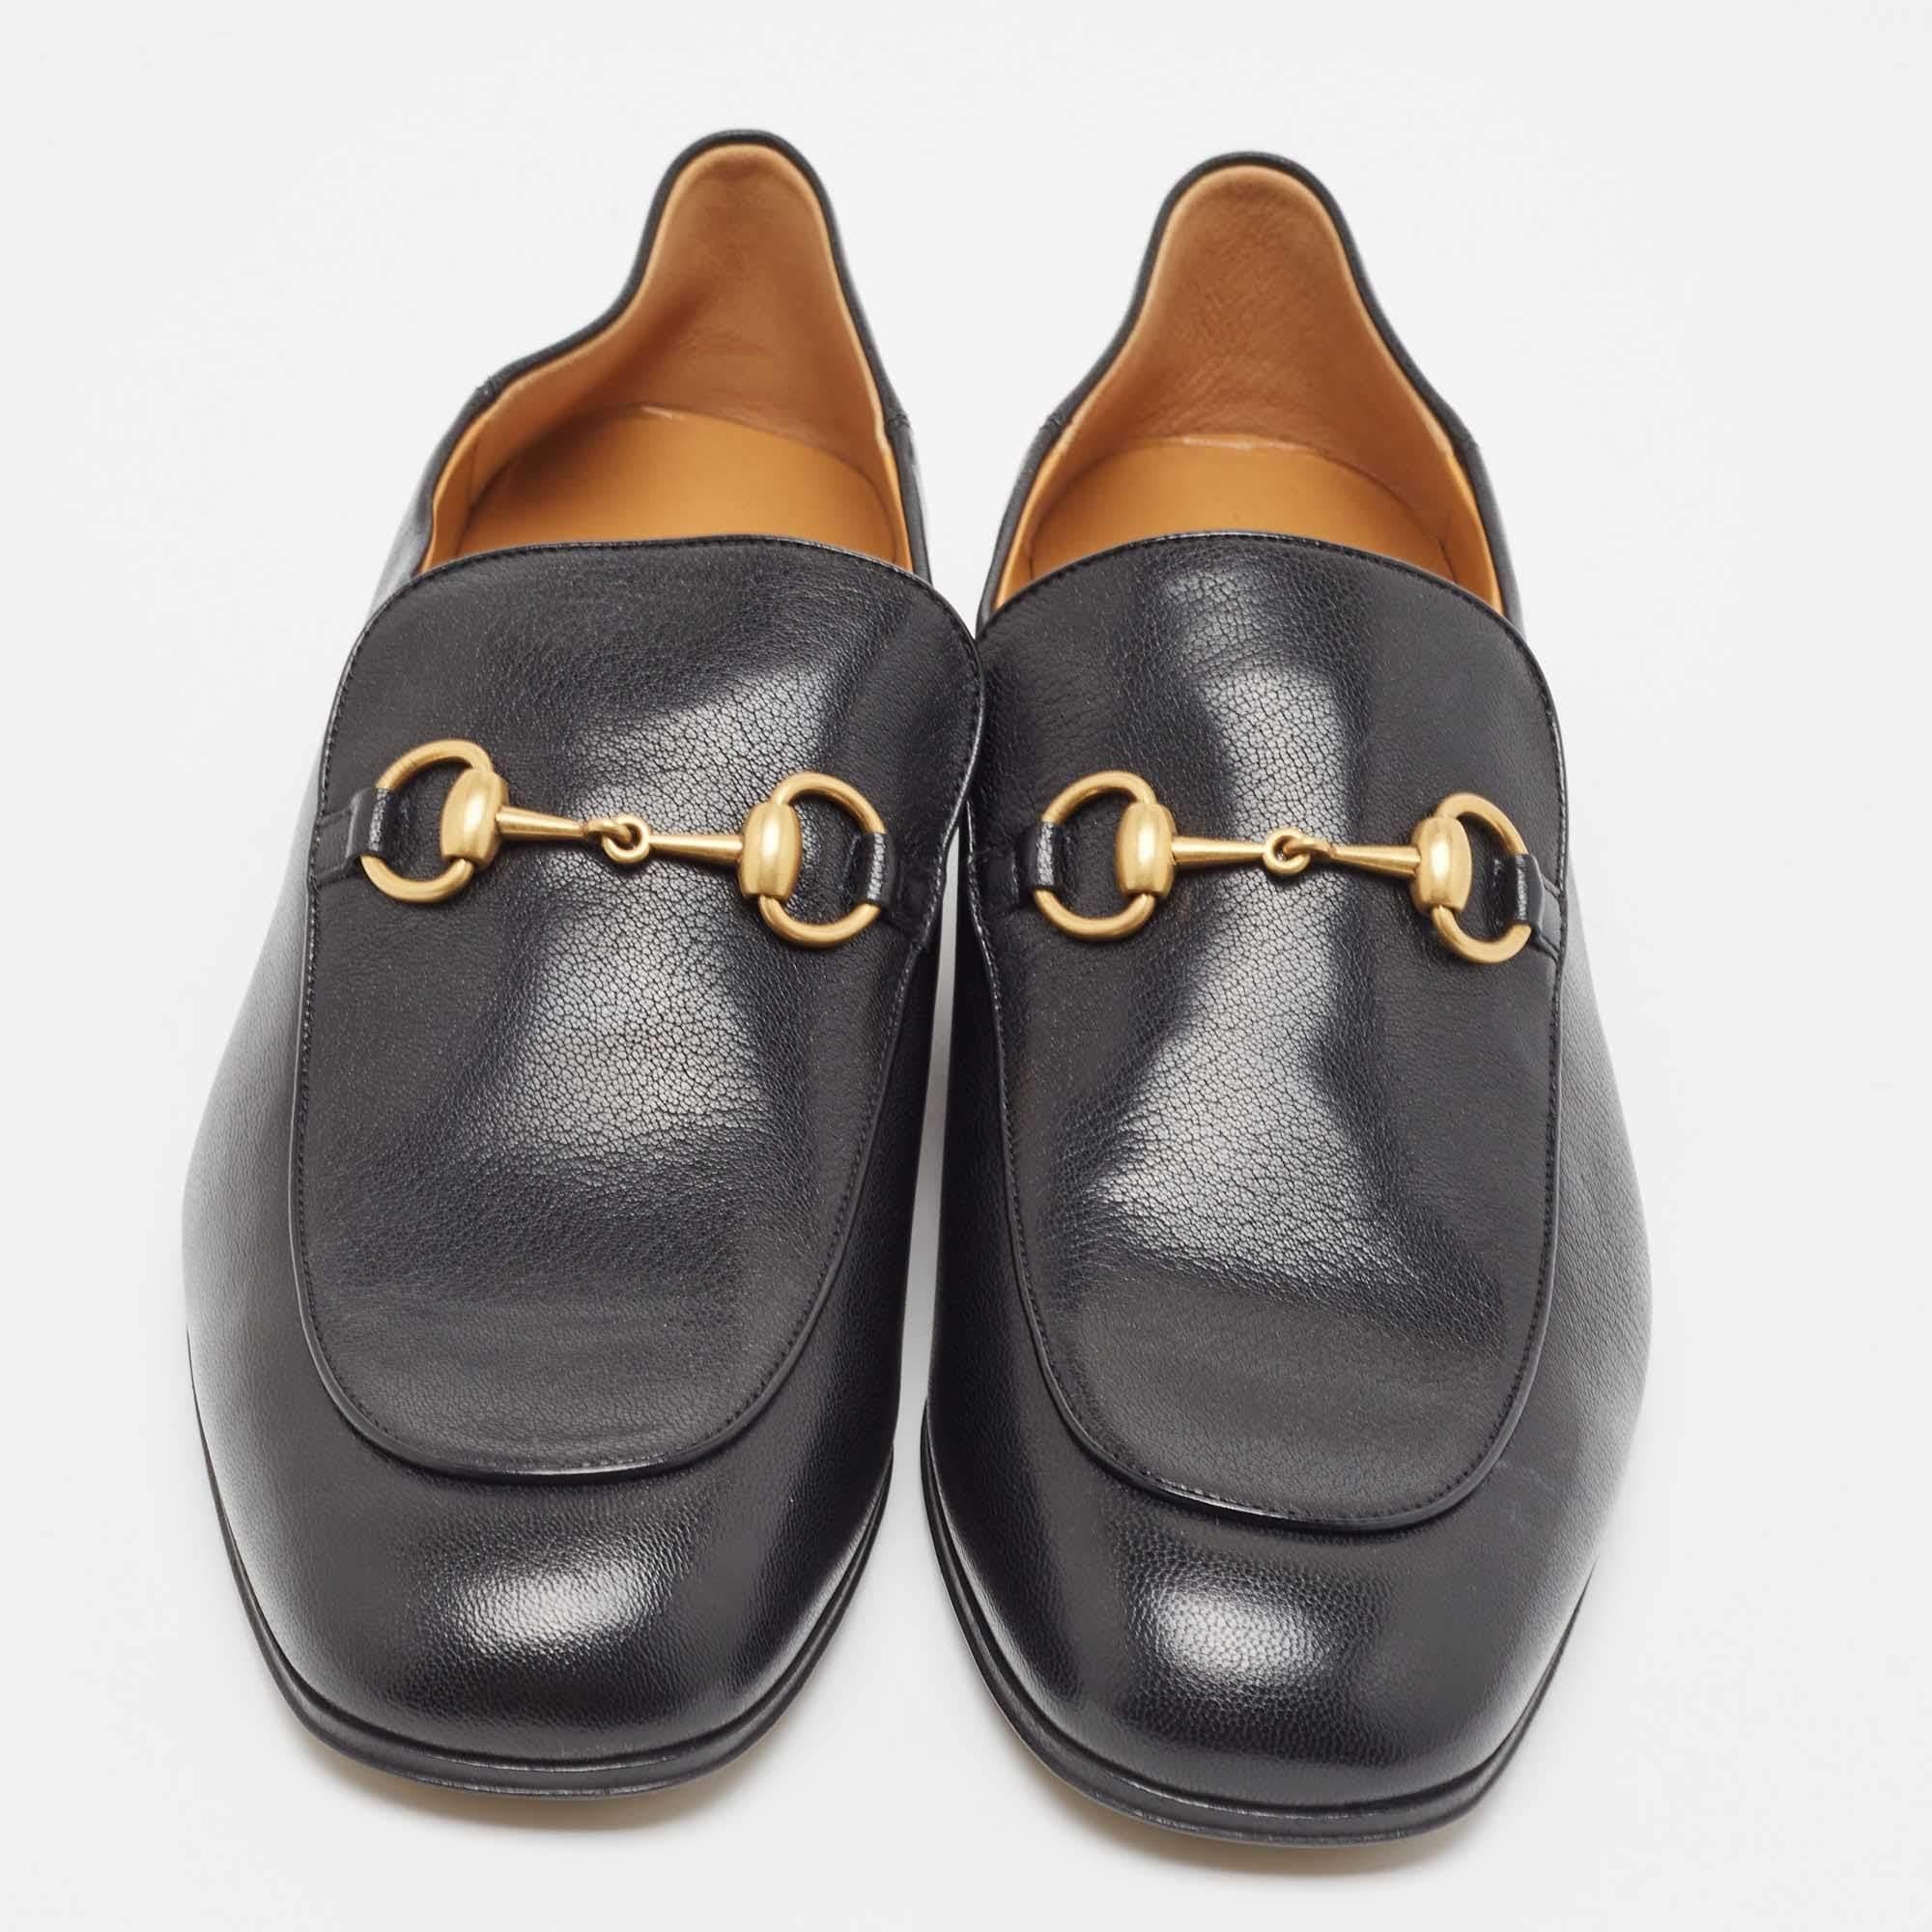 Men's Gucci Black Leather Jordaan Loafers Size 44